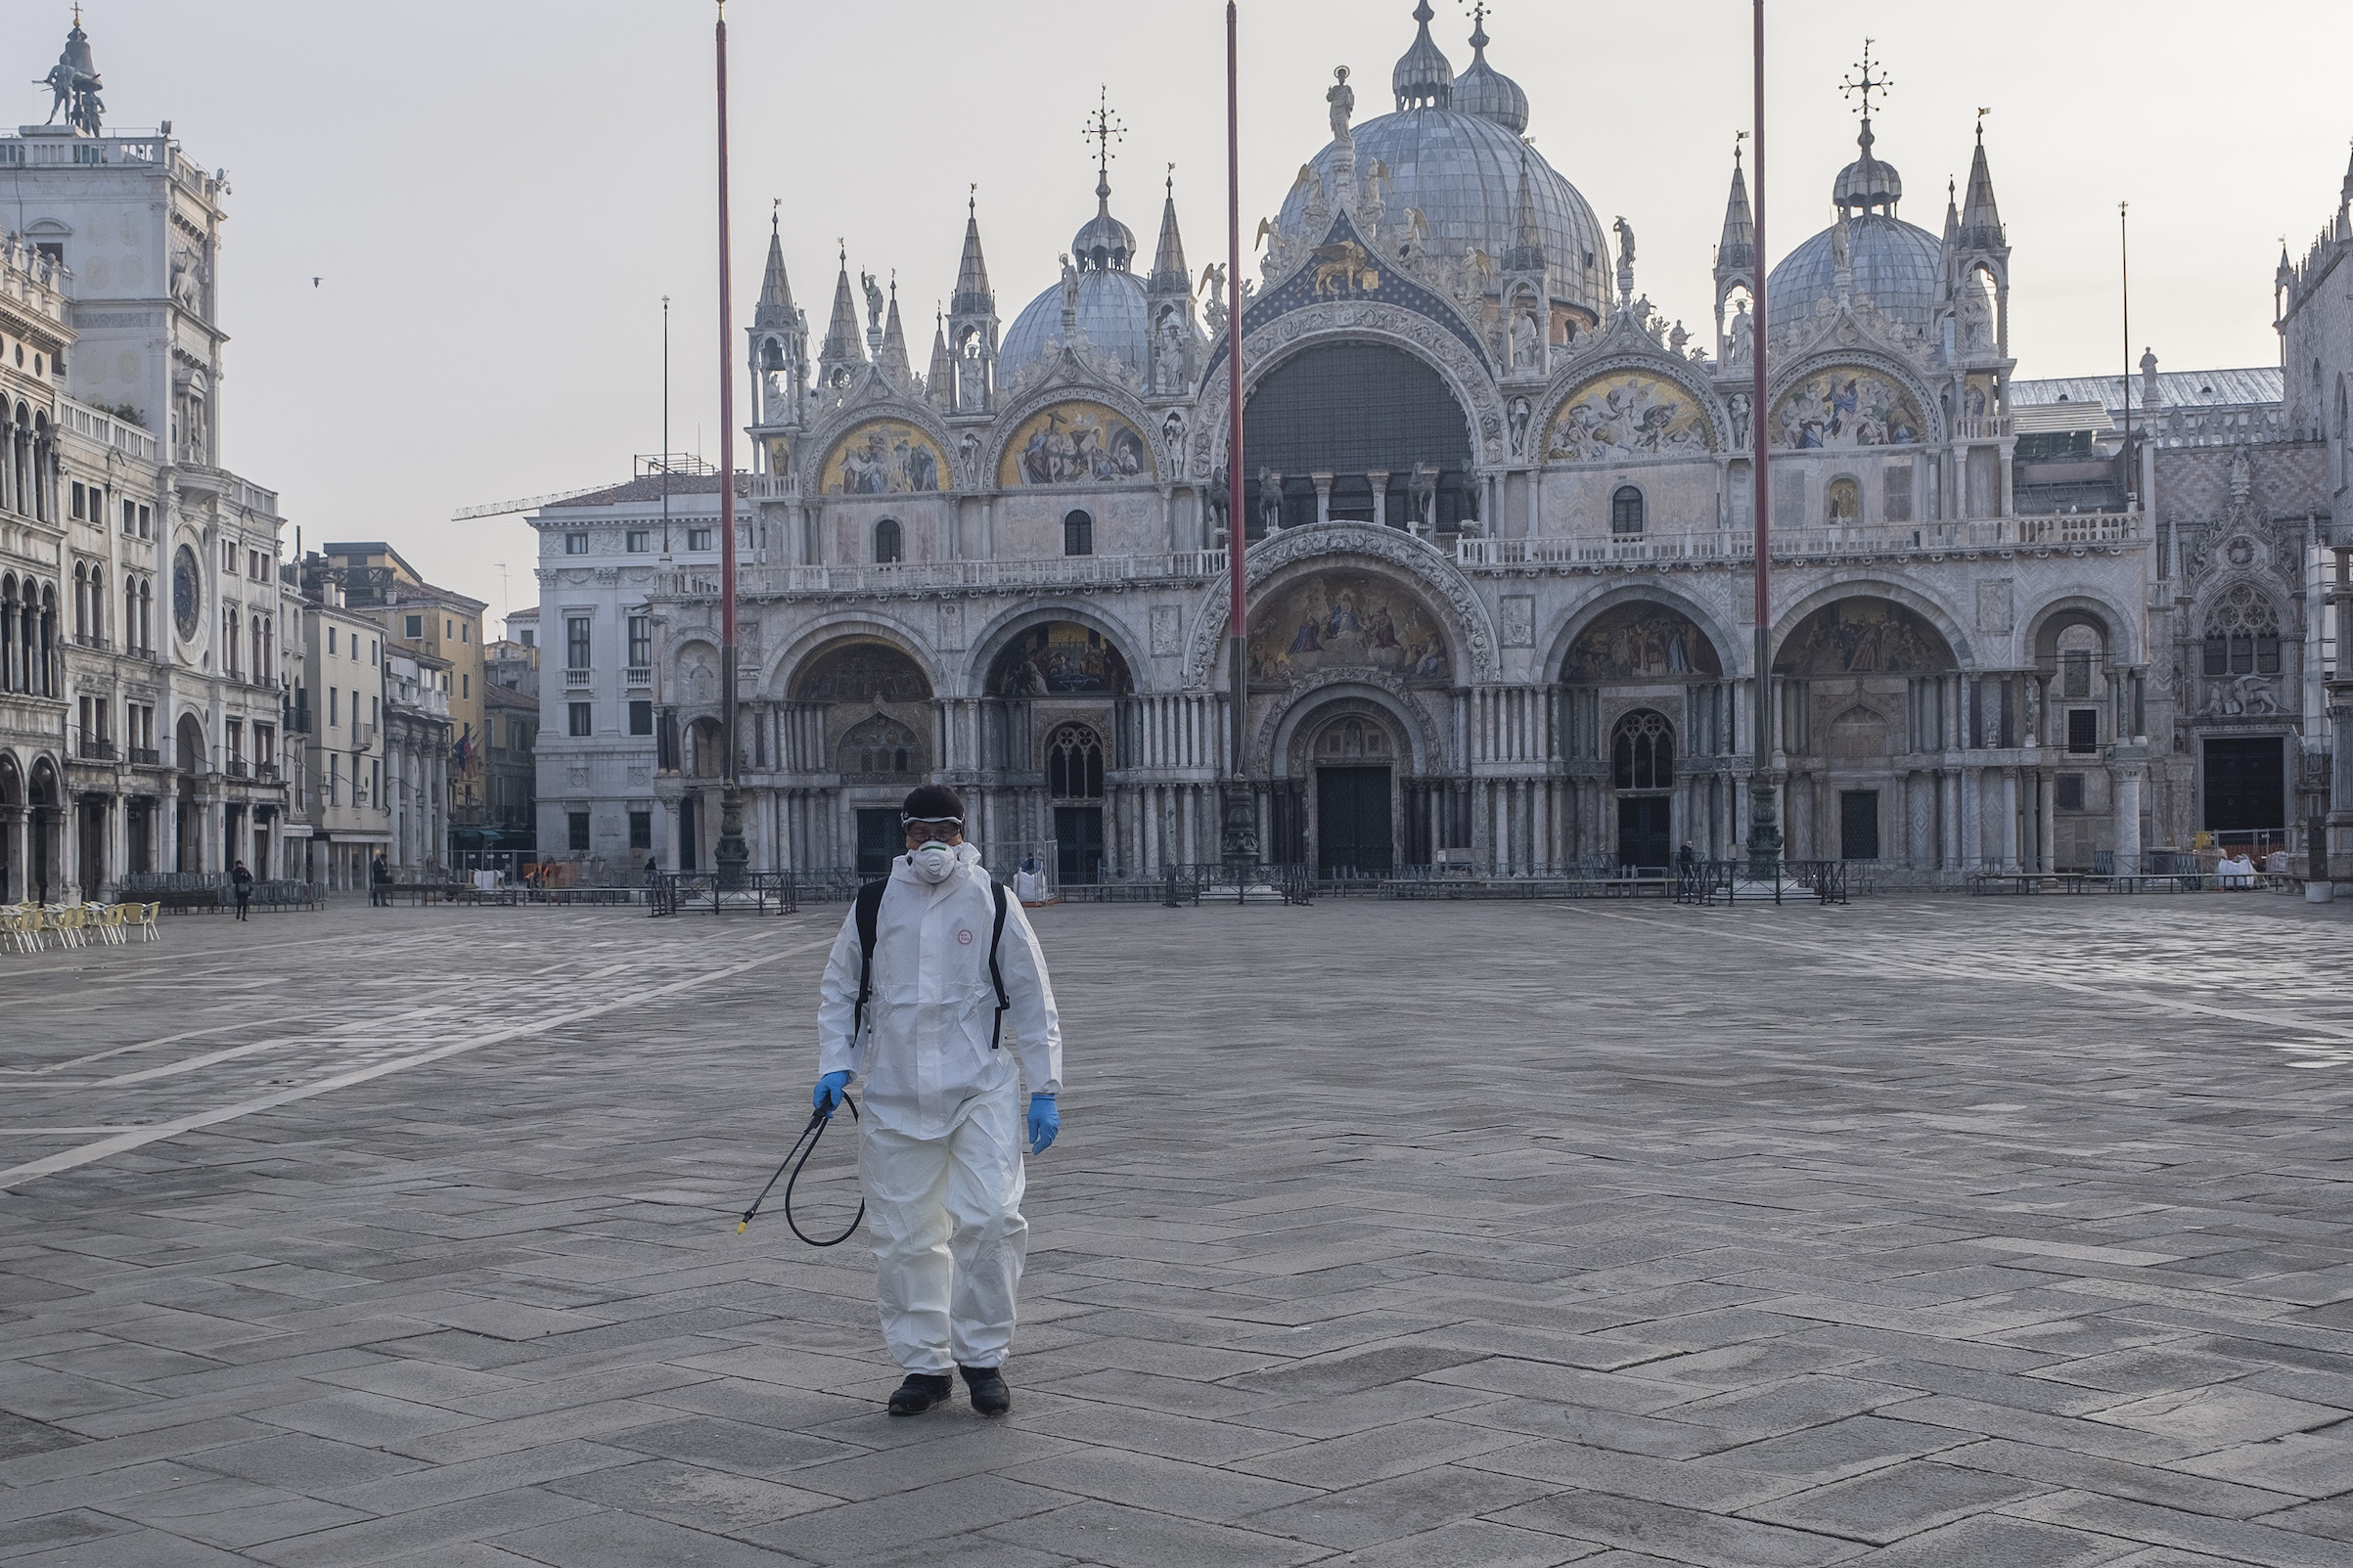 Piazza San Marco on March 11 in Venice (Stefano Mazzola—Awakening/Getty Images)